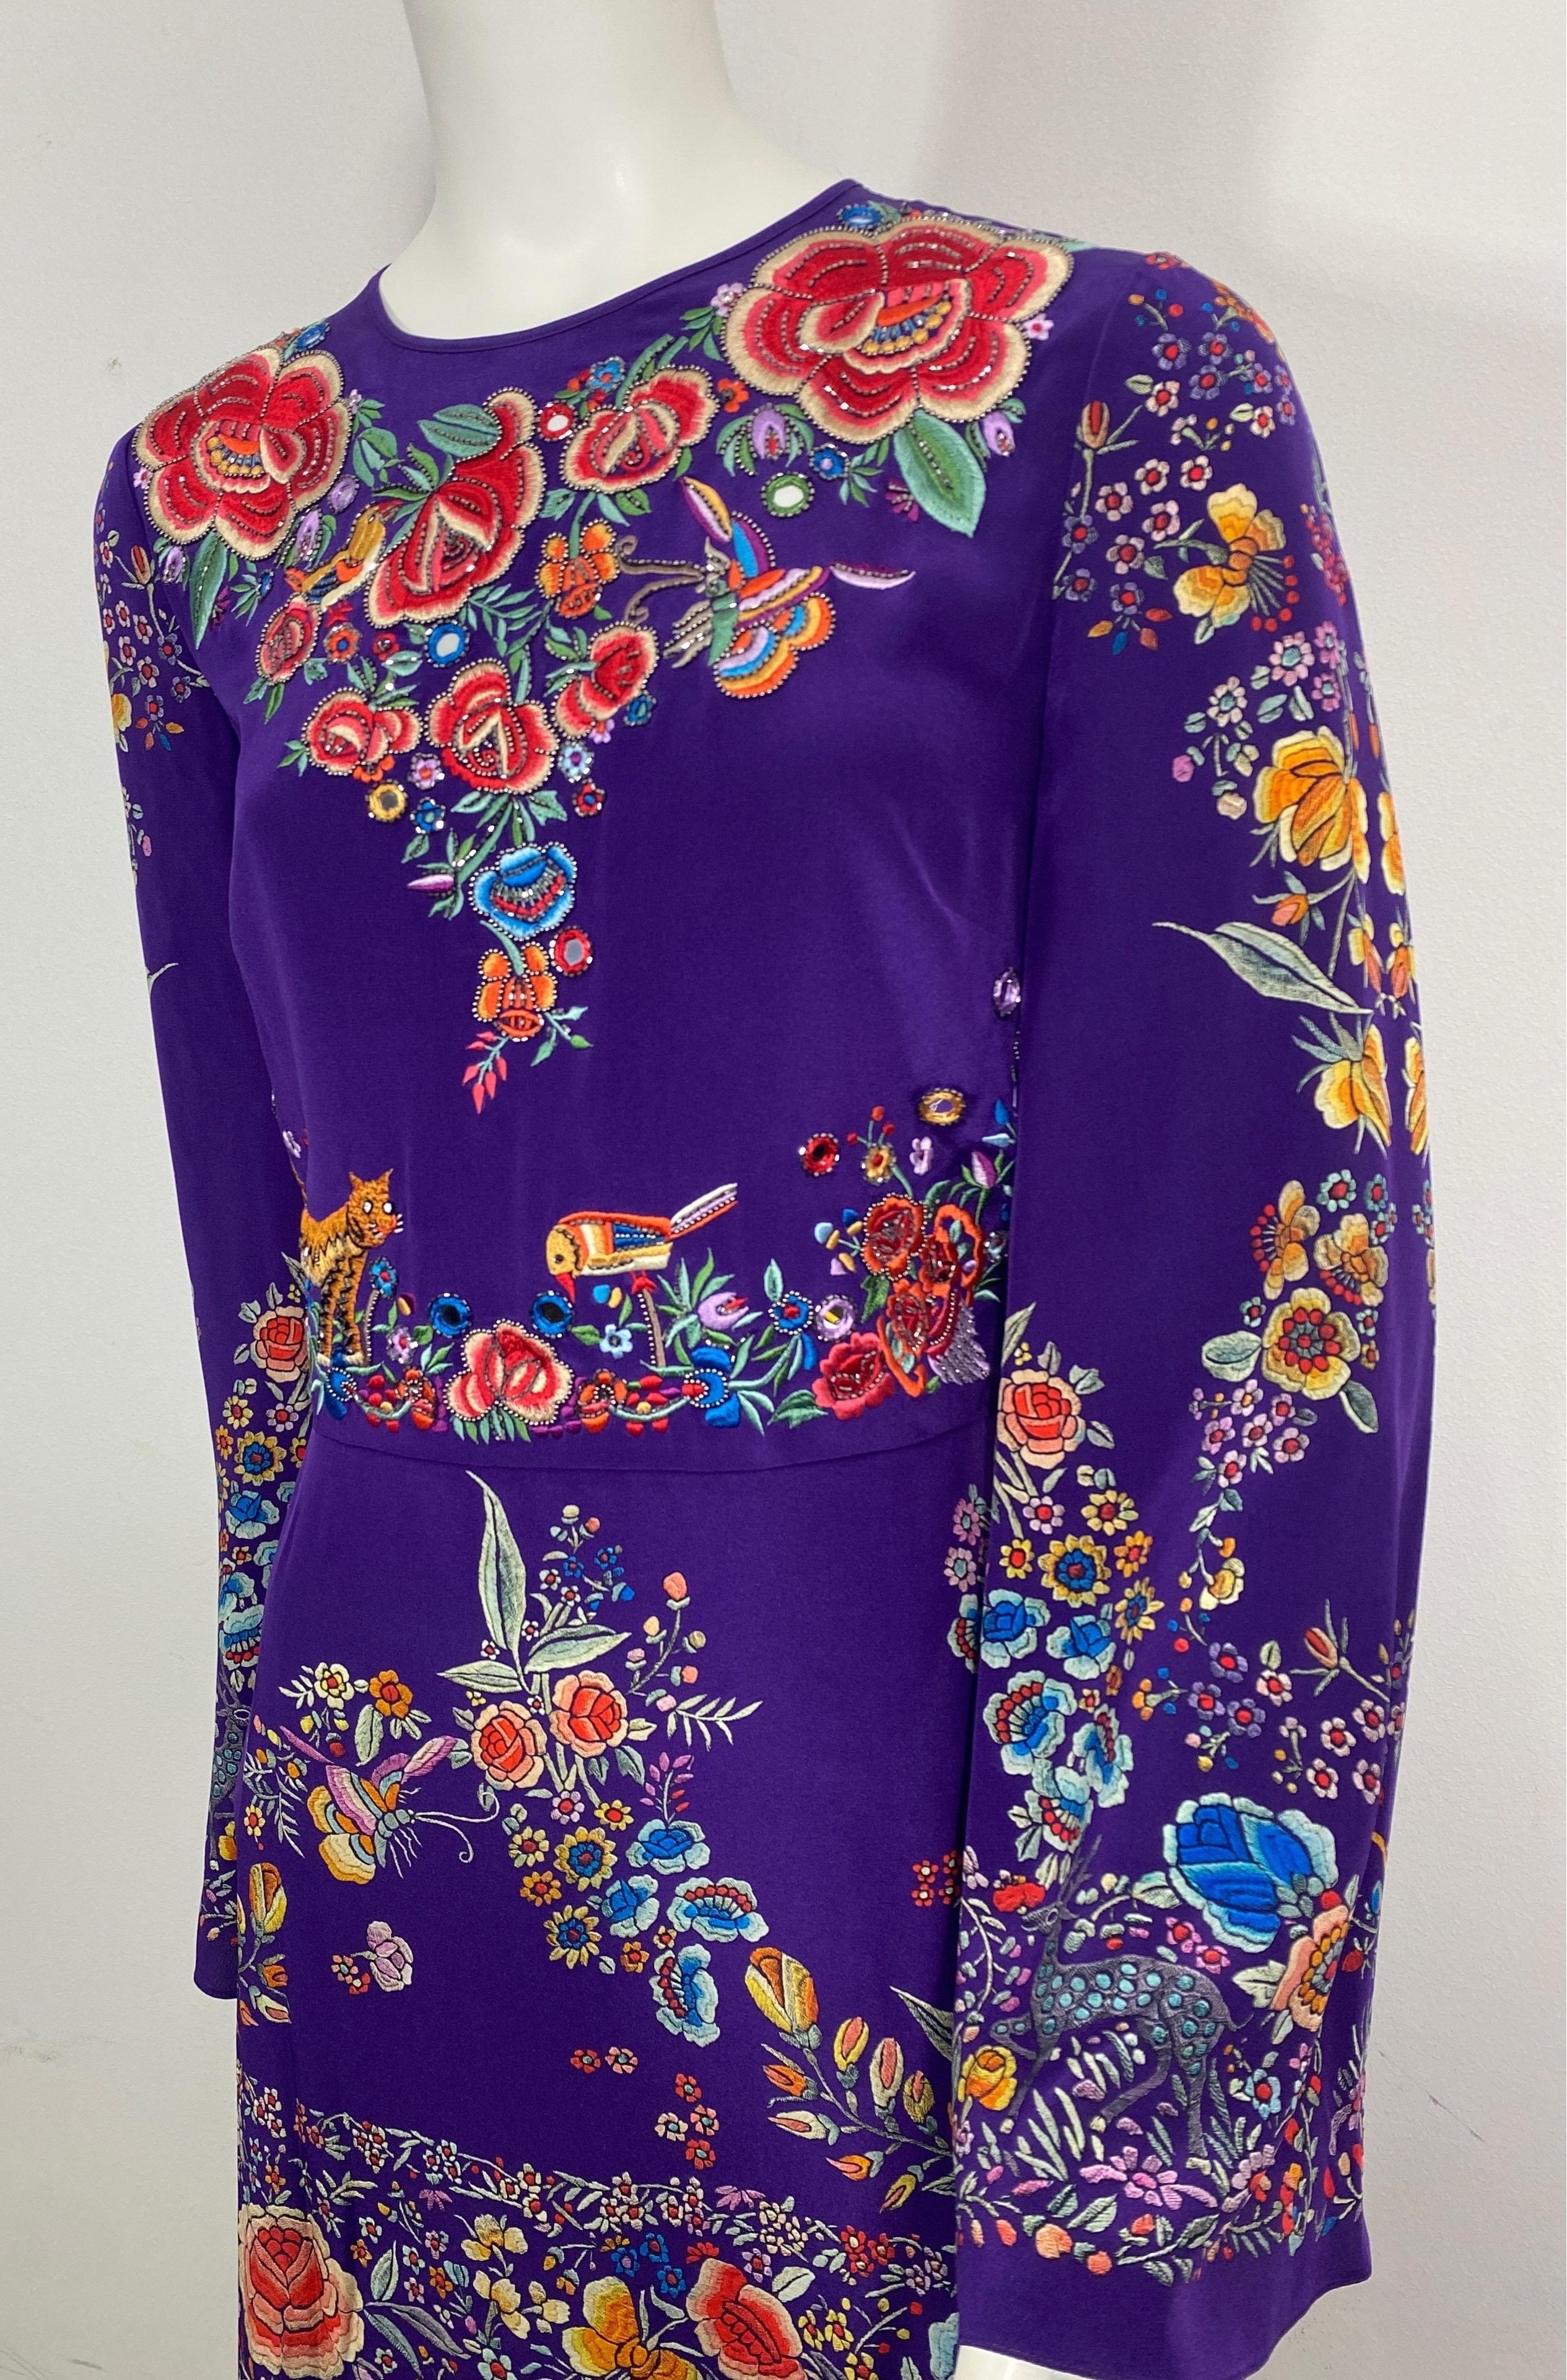 Roberto Cavalli Resort 2017 Purple Multi Embroidered Silk Print Dress-Size 40 In Excellent Condition For Sale In West Palm Beach, FL